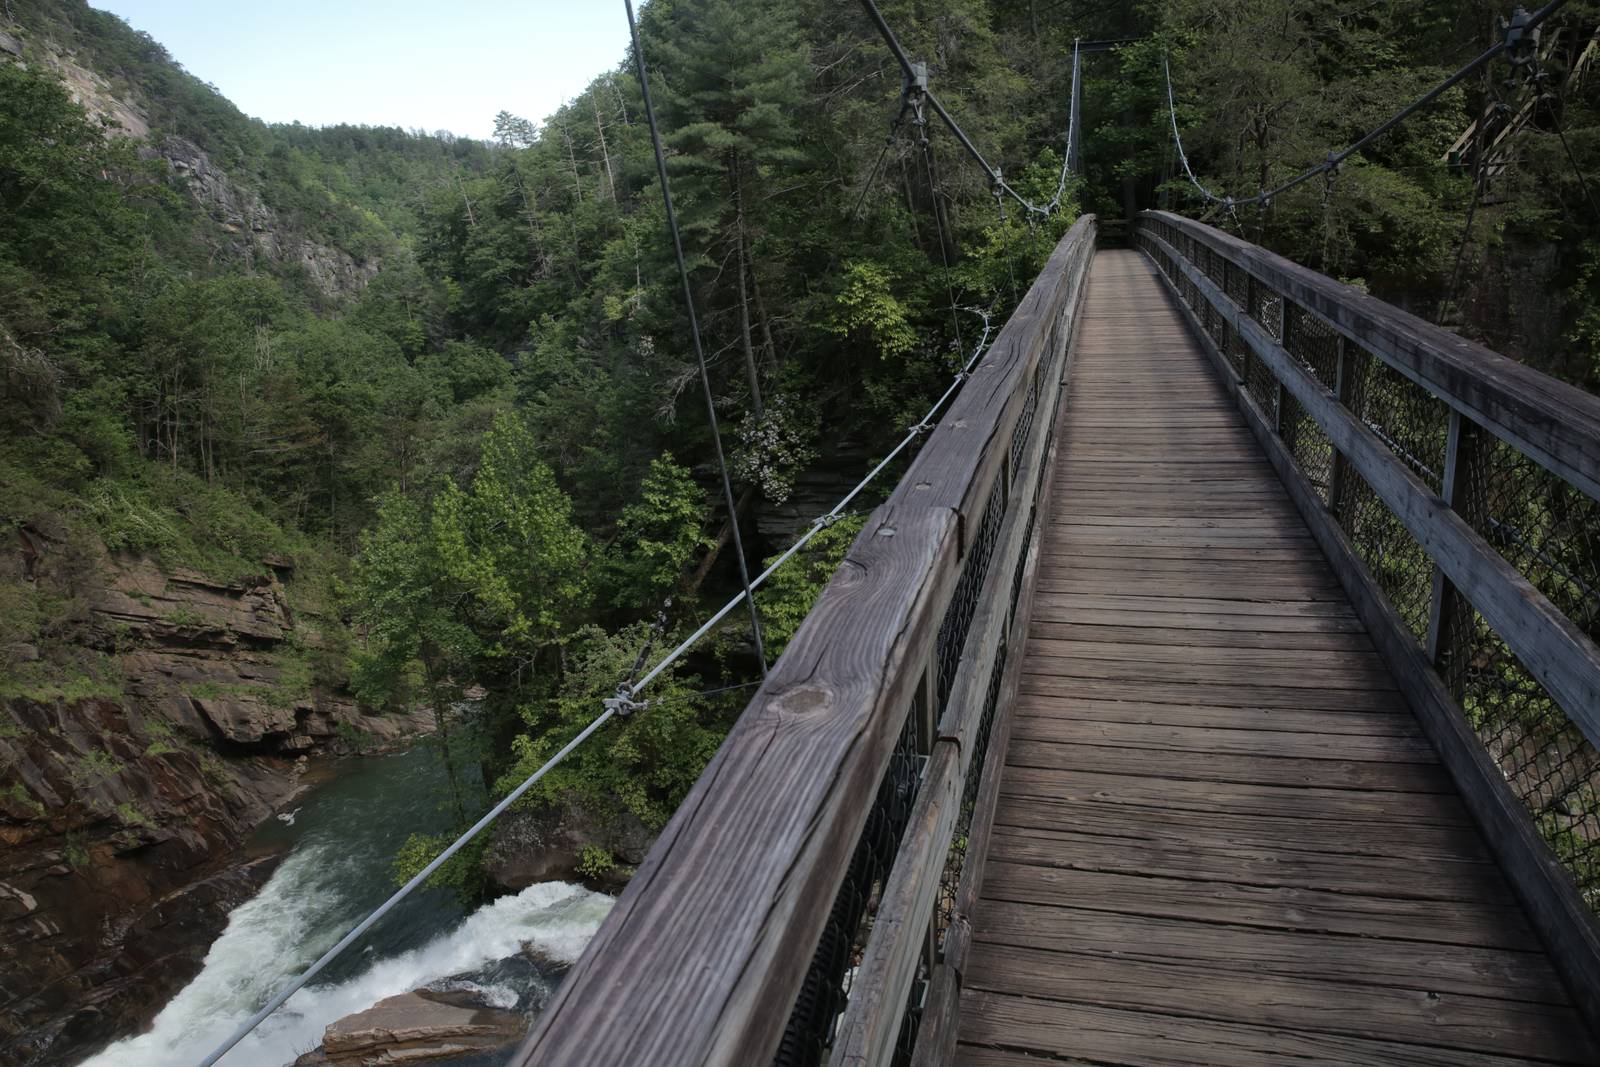 1,062 stairs take hikers across suspension bridge down to amazing ...